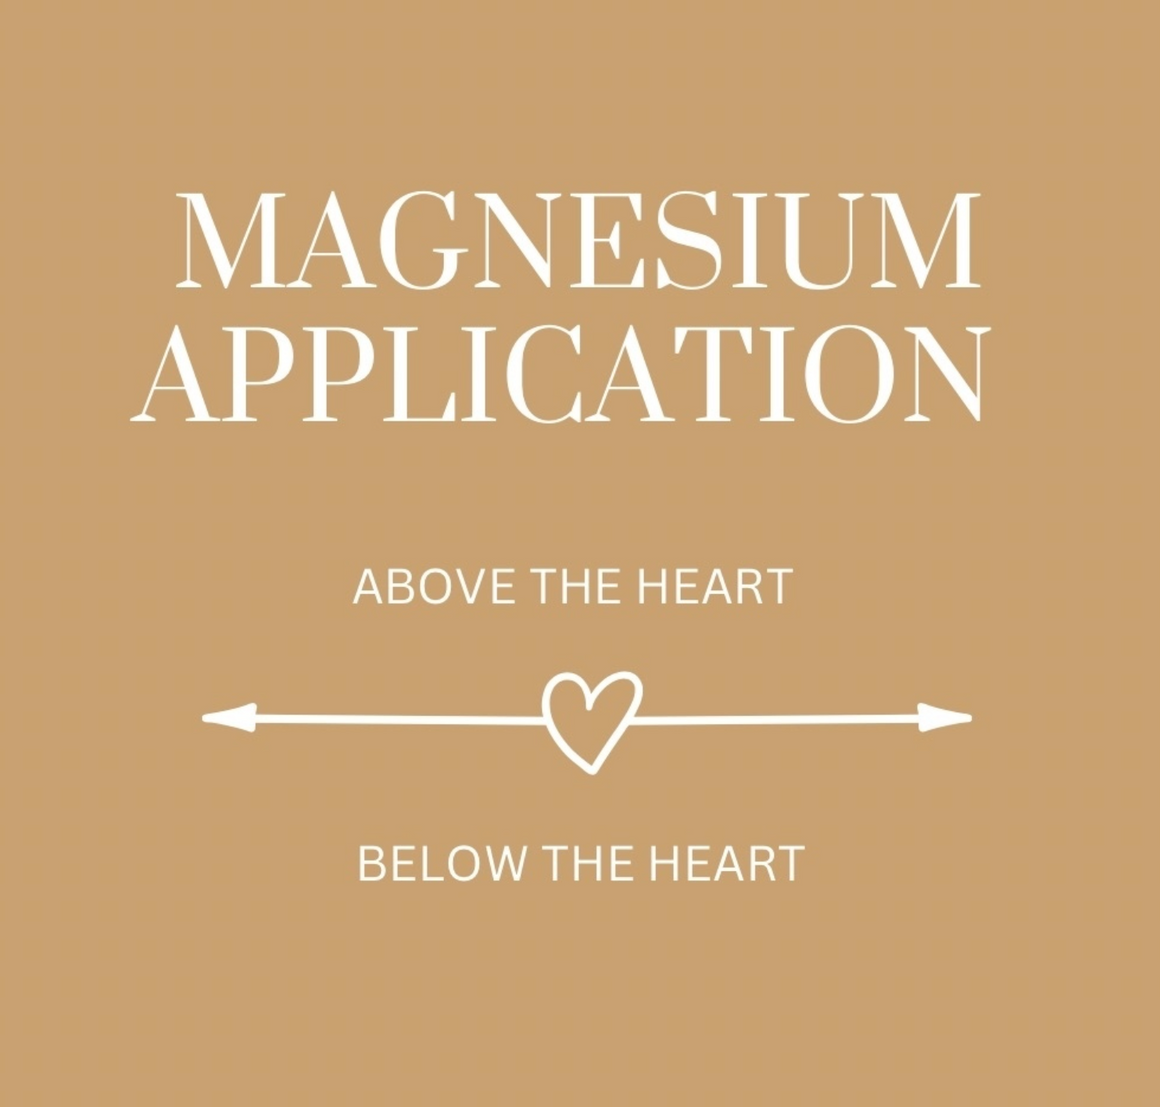 Magnesium Application above the heart vs below the heart